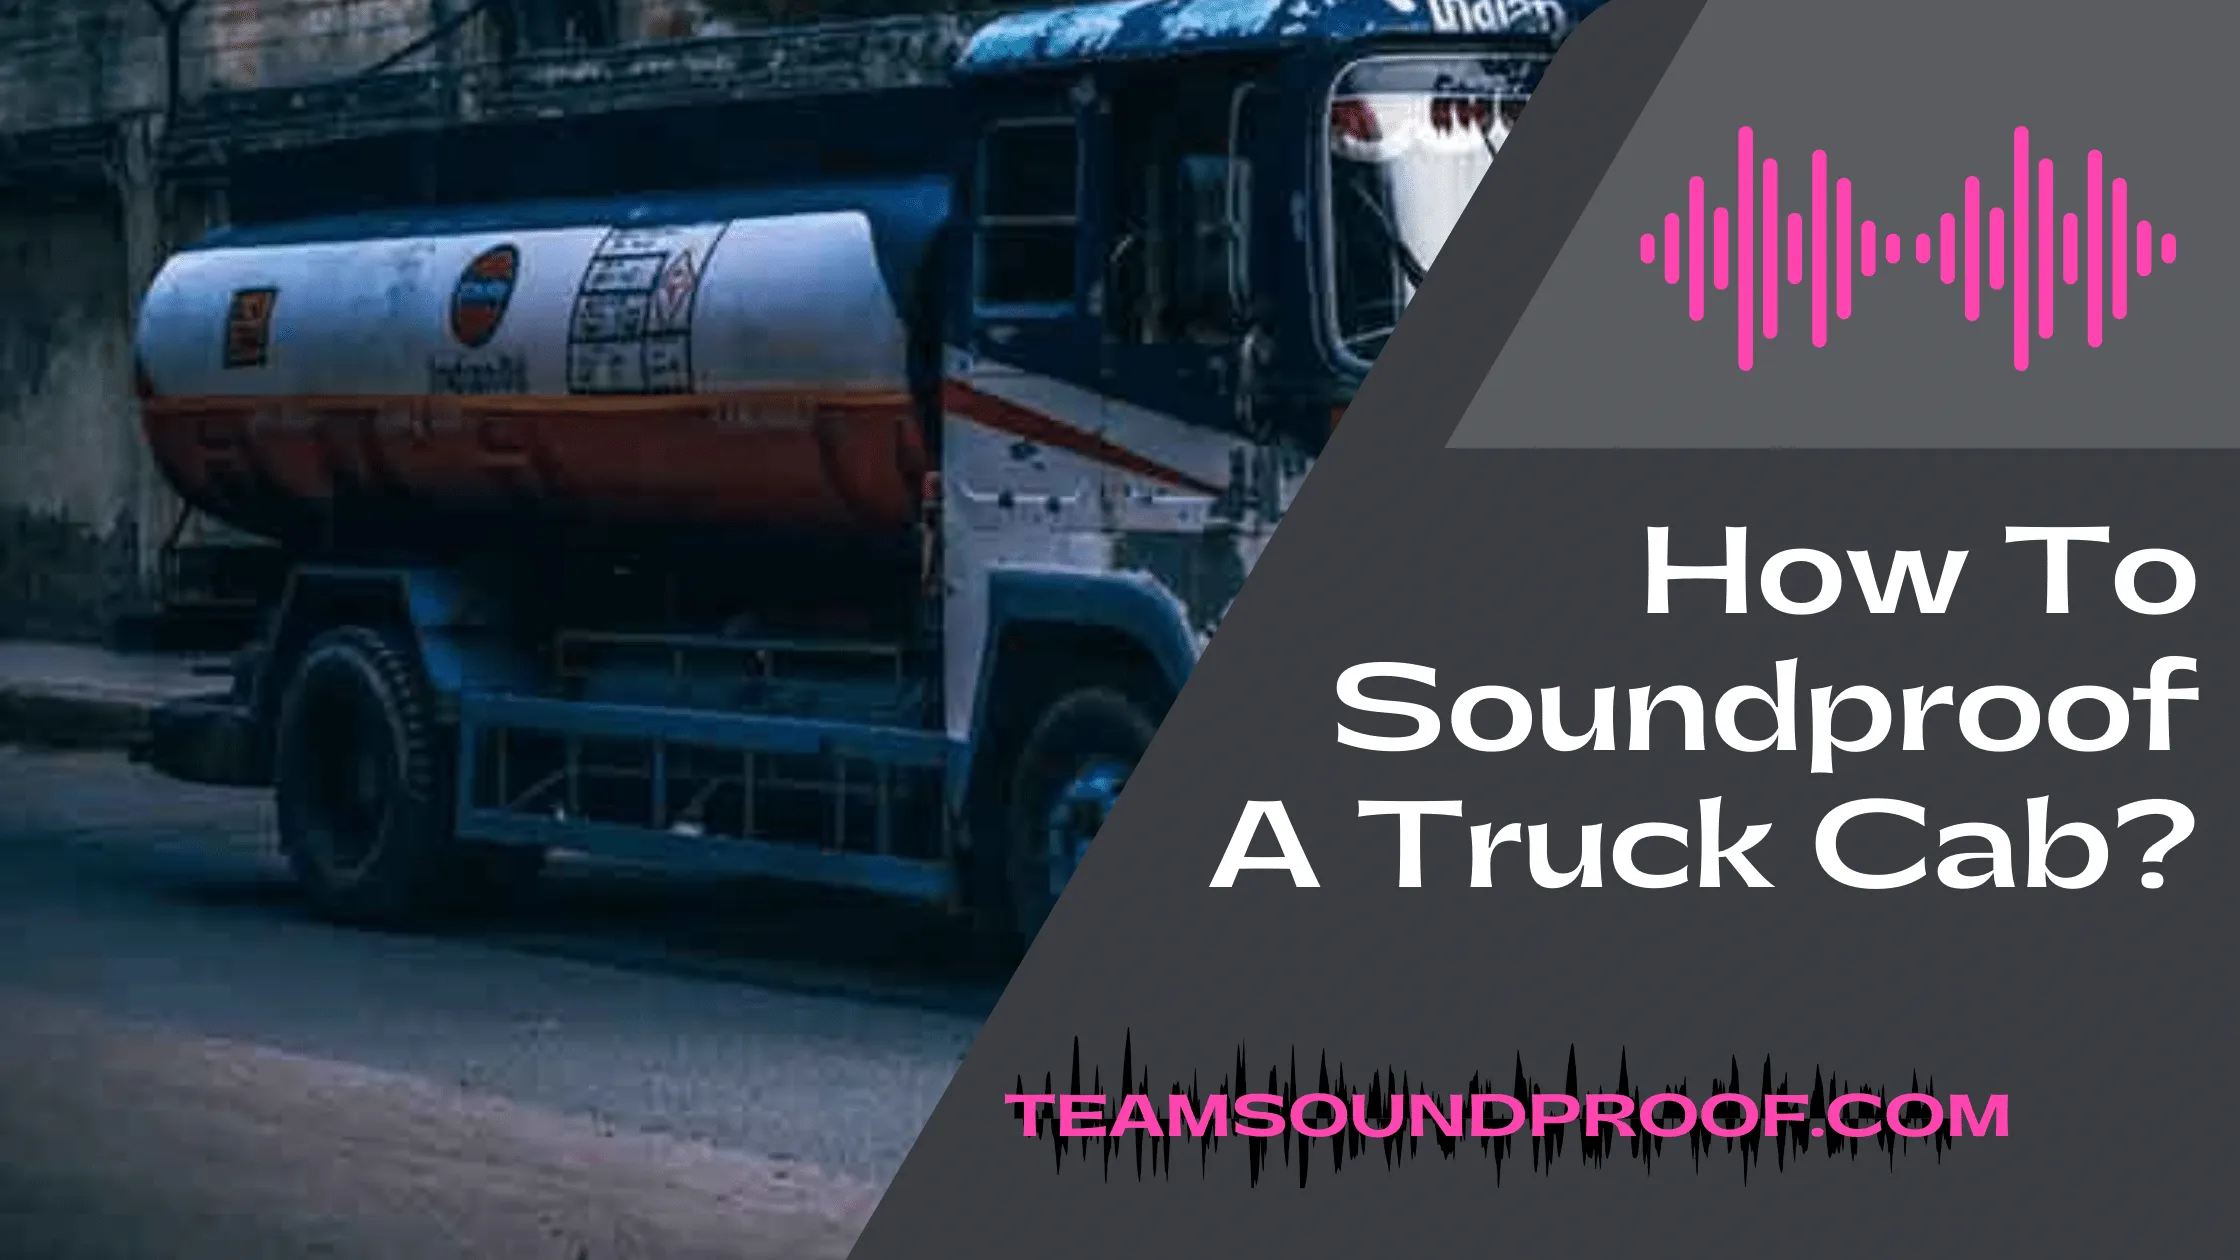 How To Soundproof A Truck Cab? - Recommended Guide